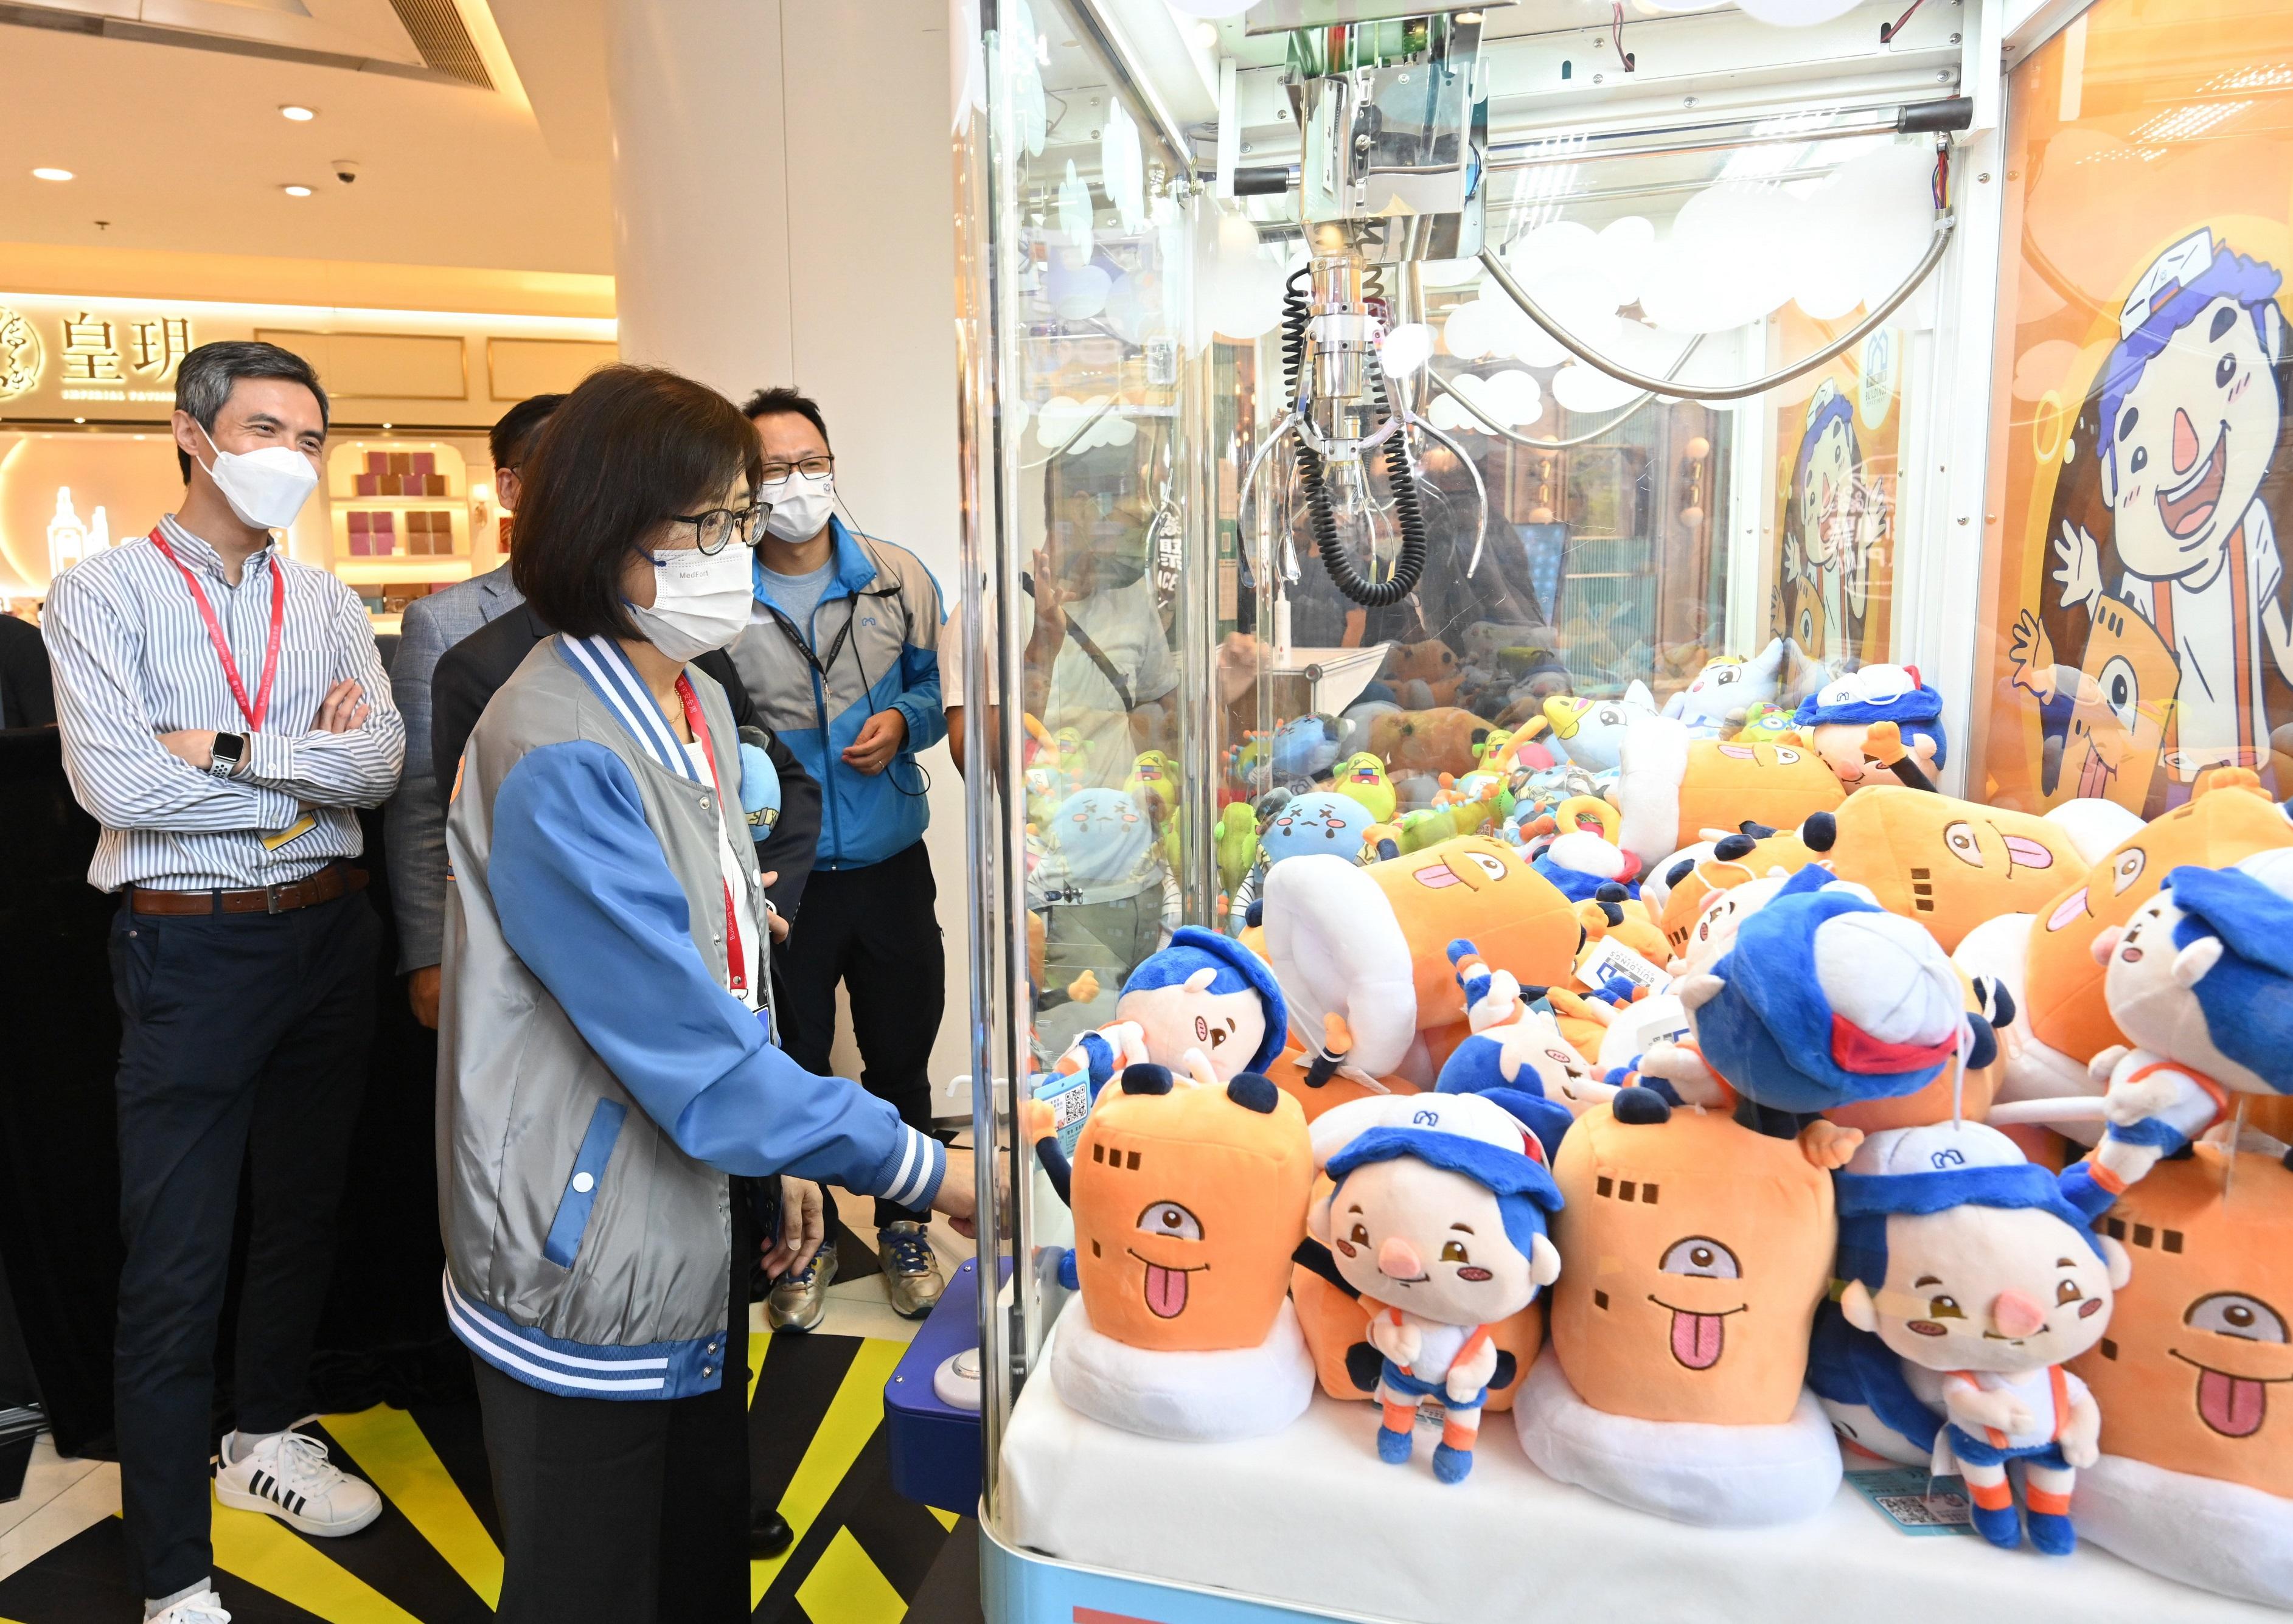 The Director of Buildings, Ms Clarice Yu, tries one of the booth games at the Building Safety Carnival after the opening ceremony of Building Safety Week 2022 today (October 22).